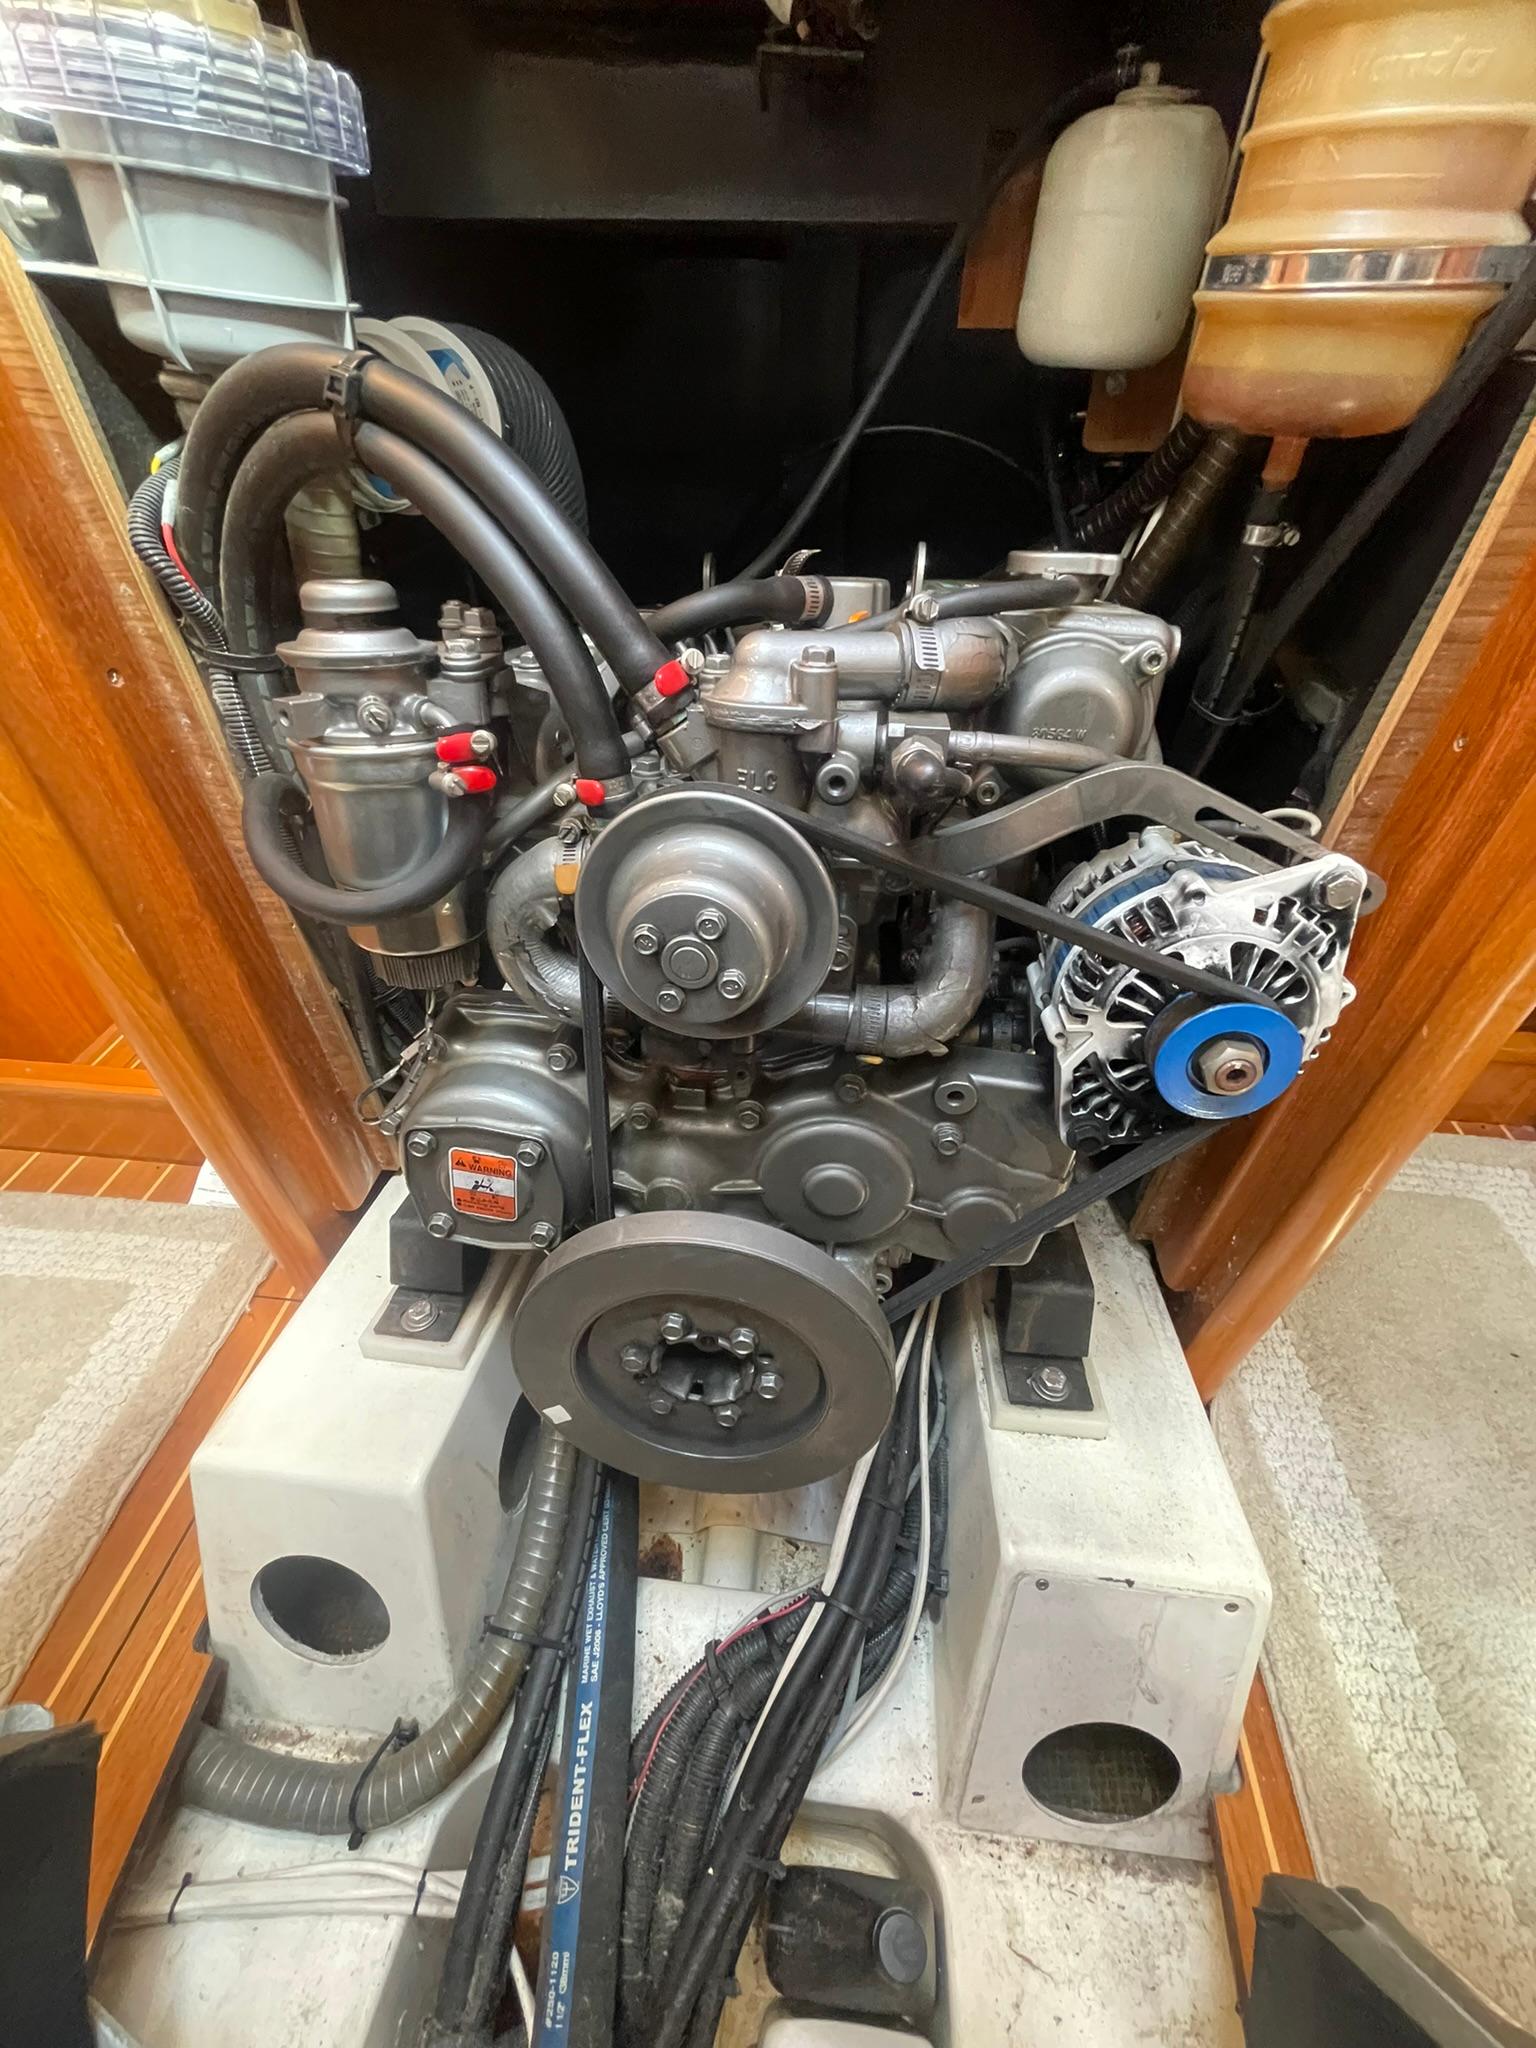 ENGINE VIEW FROM FRONT